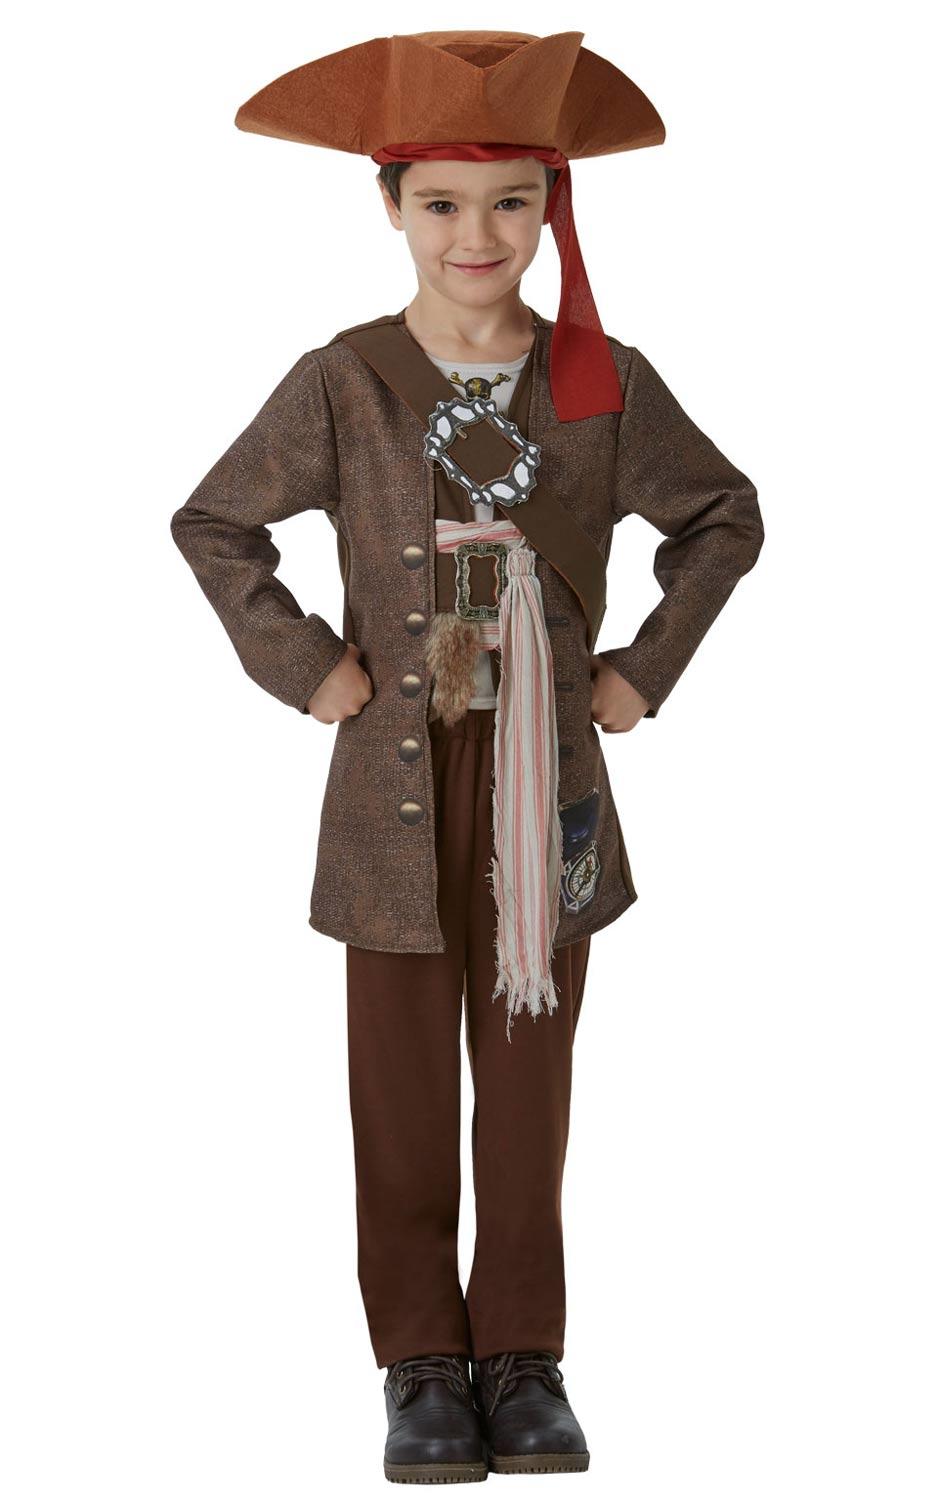 Deluxe Captain Jack Sparrow Fancy Dress  Disney Costume by Rubies 630788 available here at Karnival Costumes online party shop